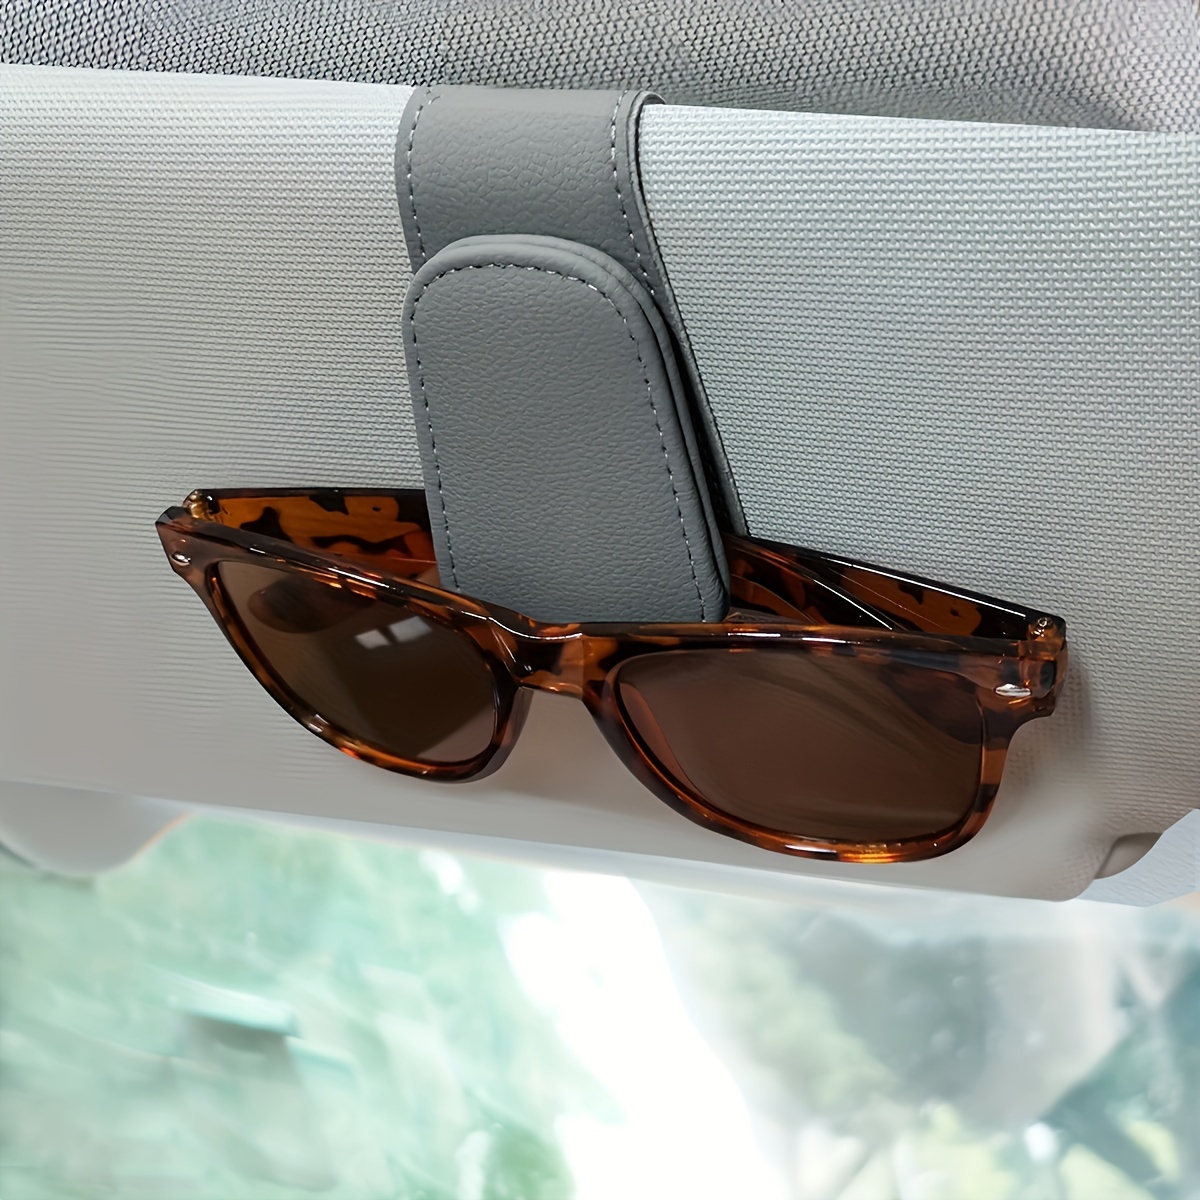 

Convenient Eyeglasses Hanger, Installed With A Magnetic Clip, Sunglasses Holder For Car Sun Visor, Artificial Leather Eyeglass Hanger Clip With Ticket Card Holder